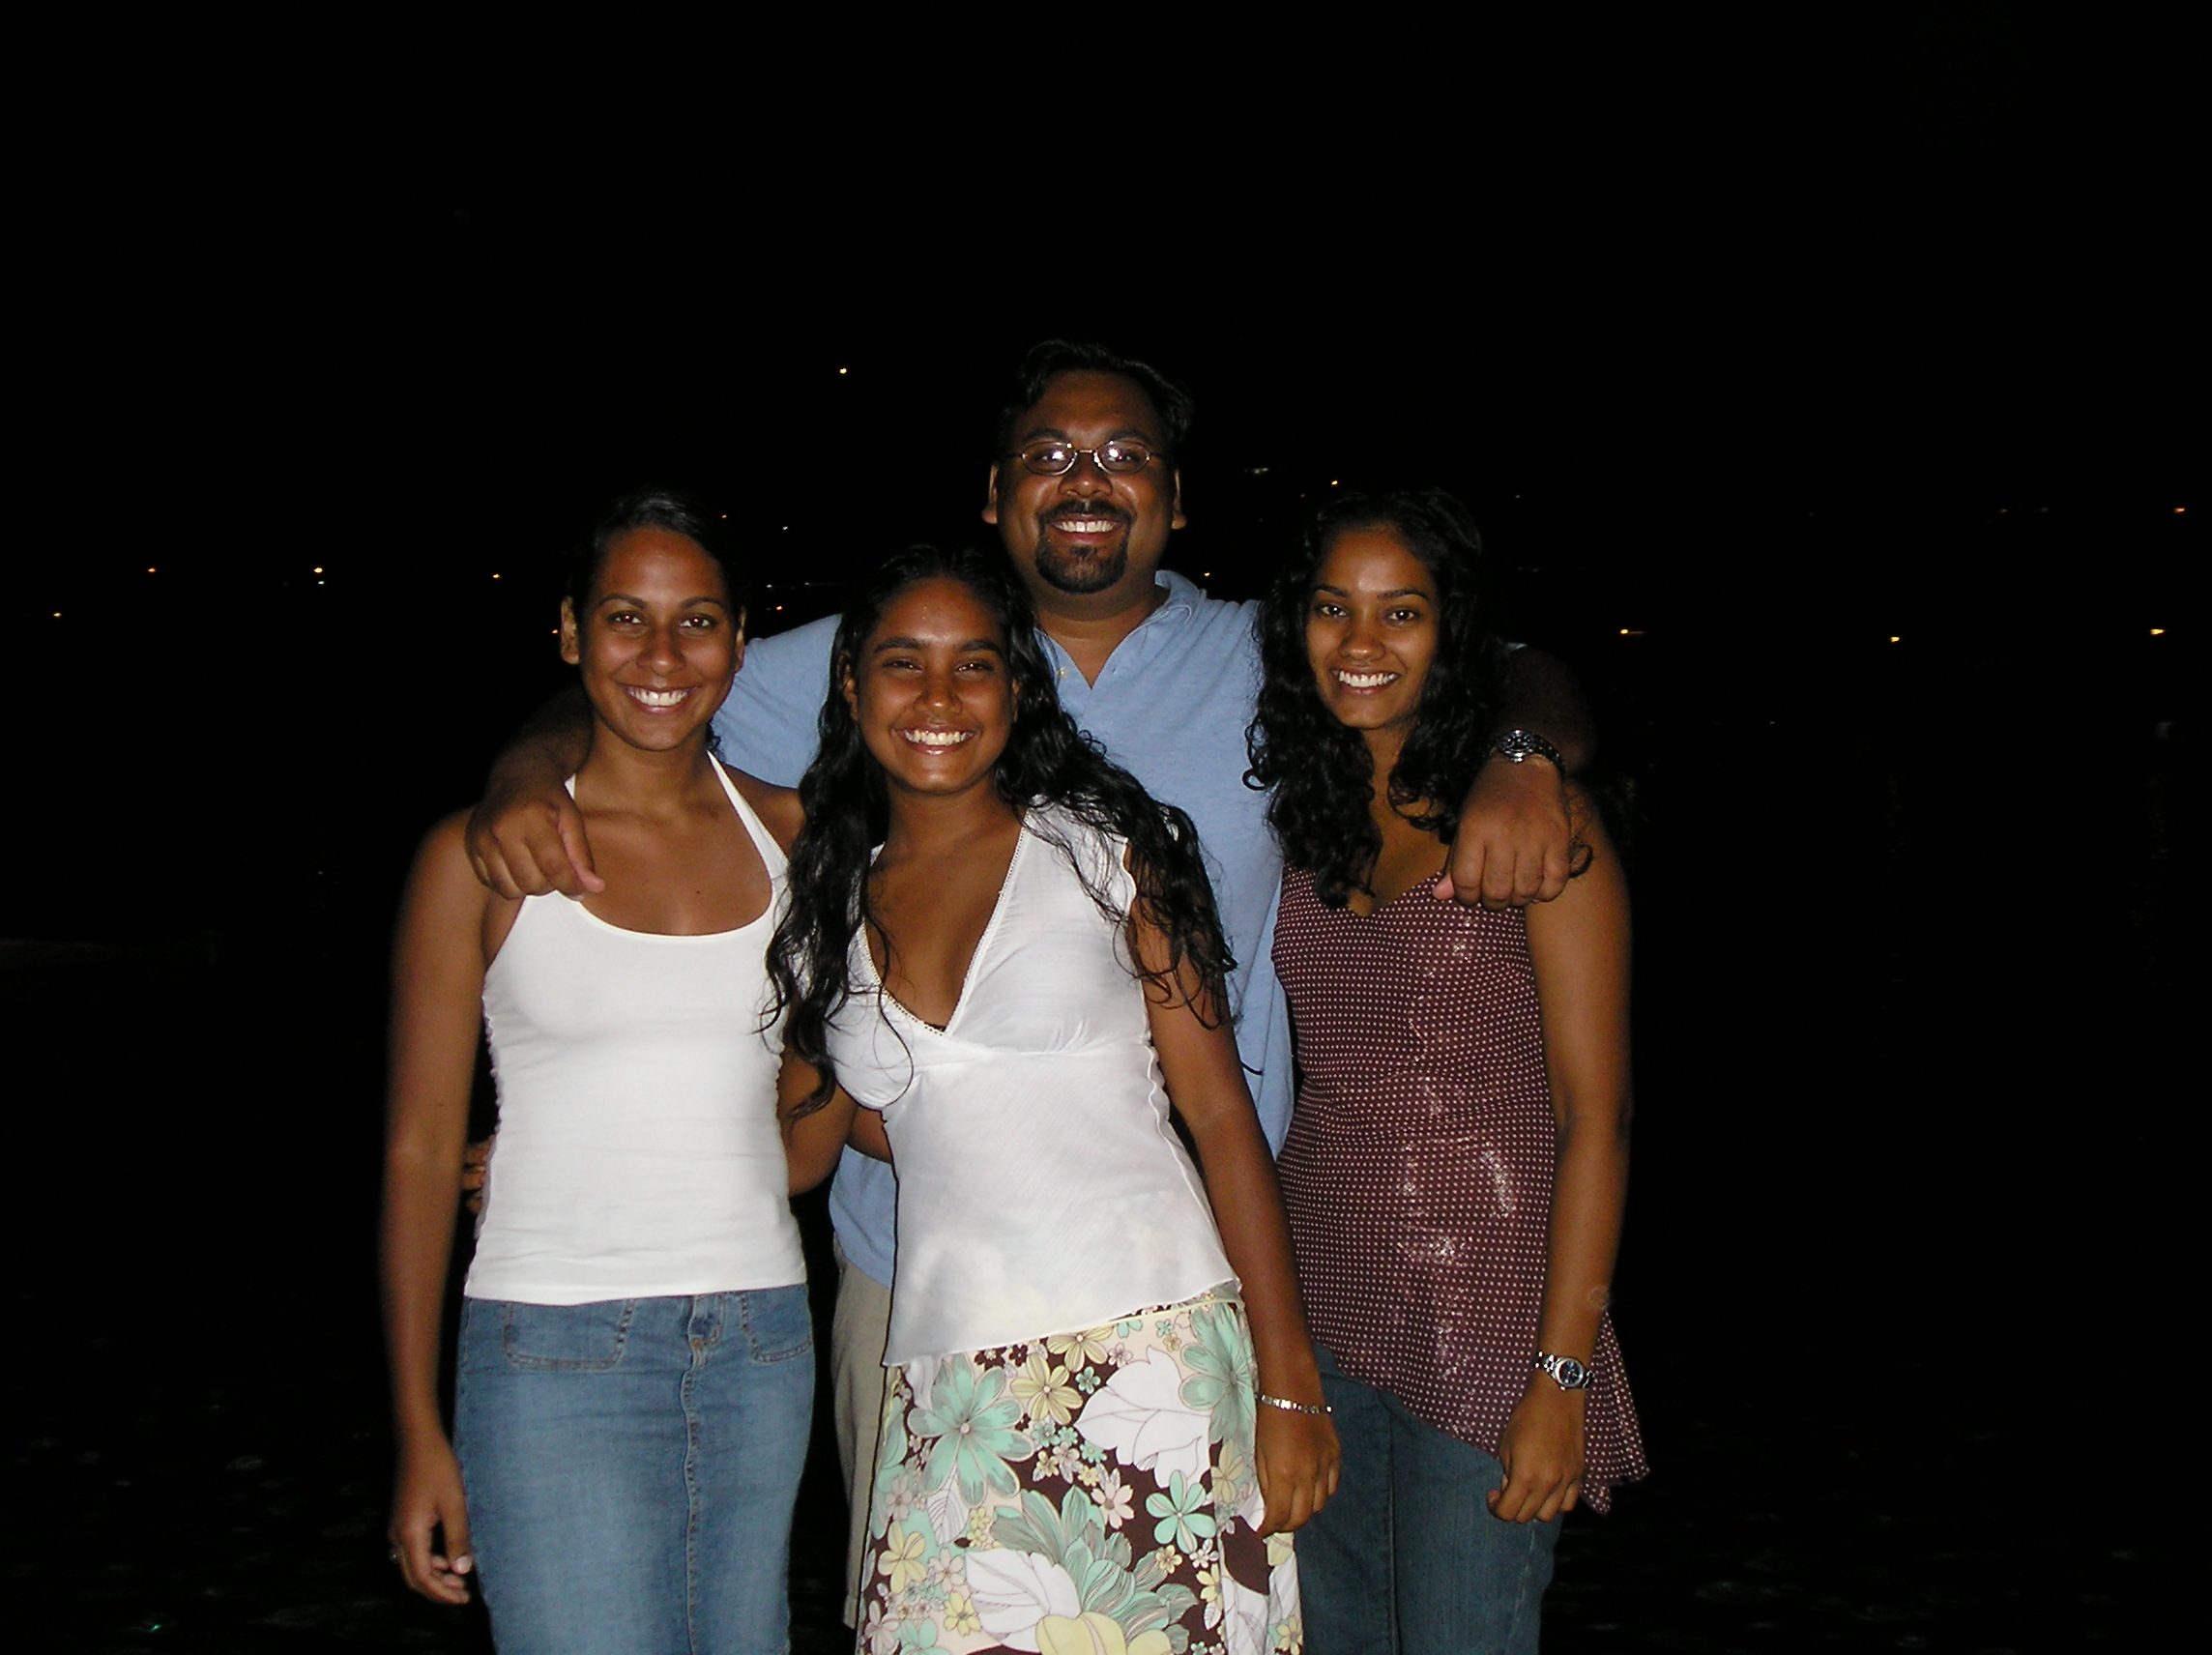 The girls and I at Young Island